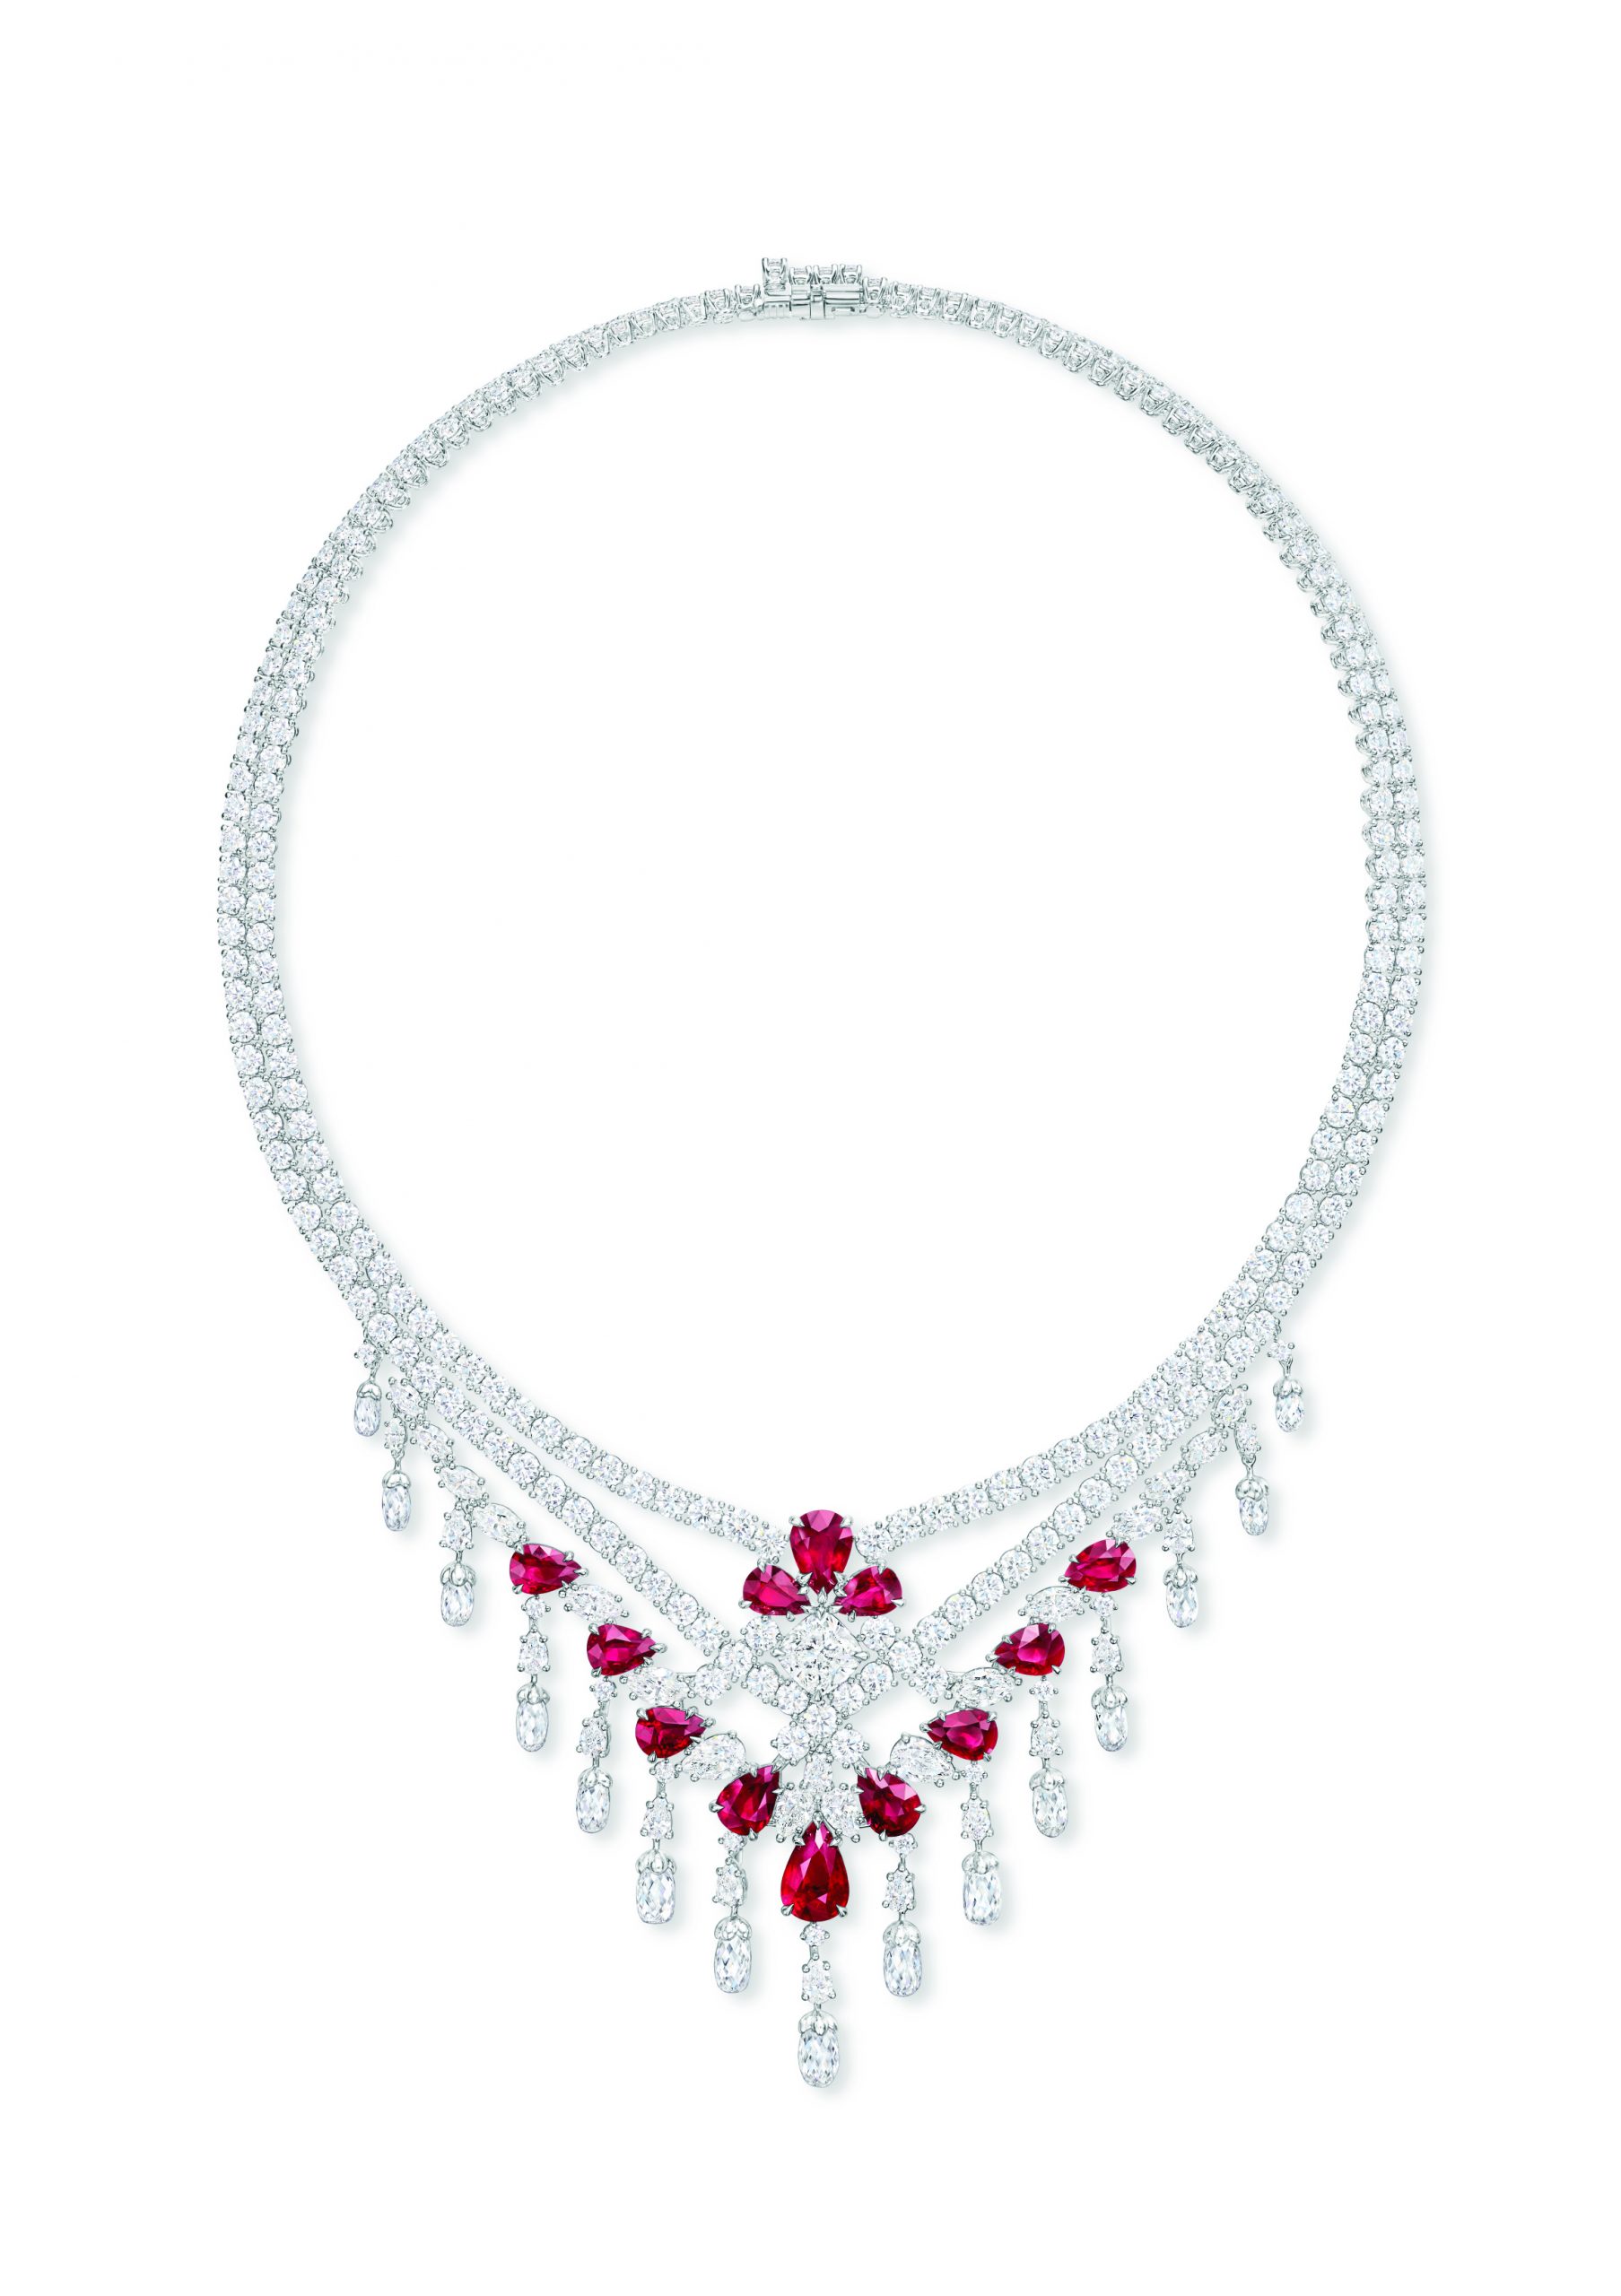 Take a closer look at Harry Winston's New York high jewellery ...